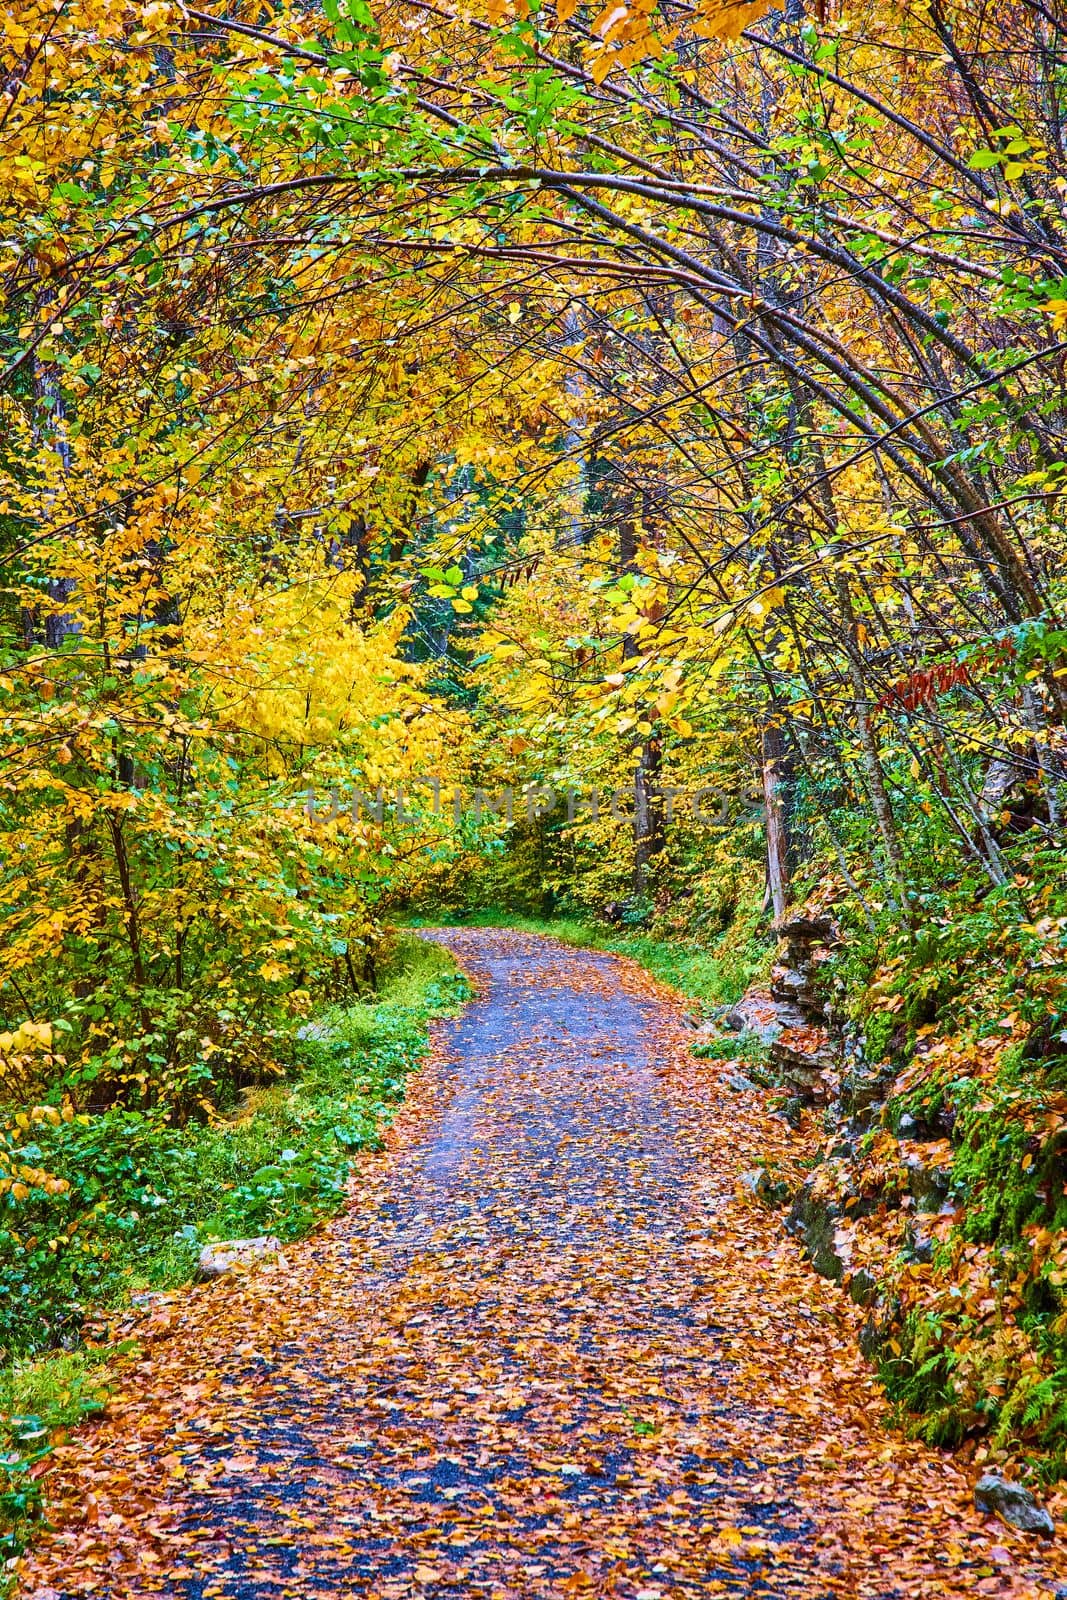 Image of Leaves covering hiking path through woods with trees arching over in peak fall